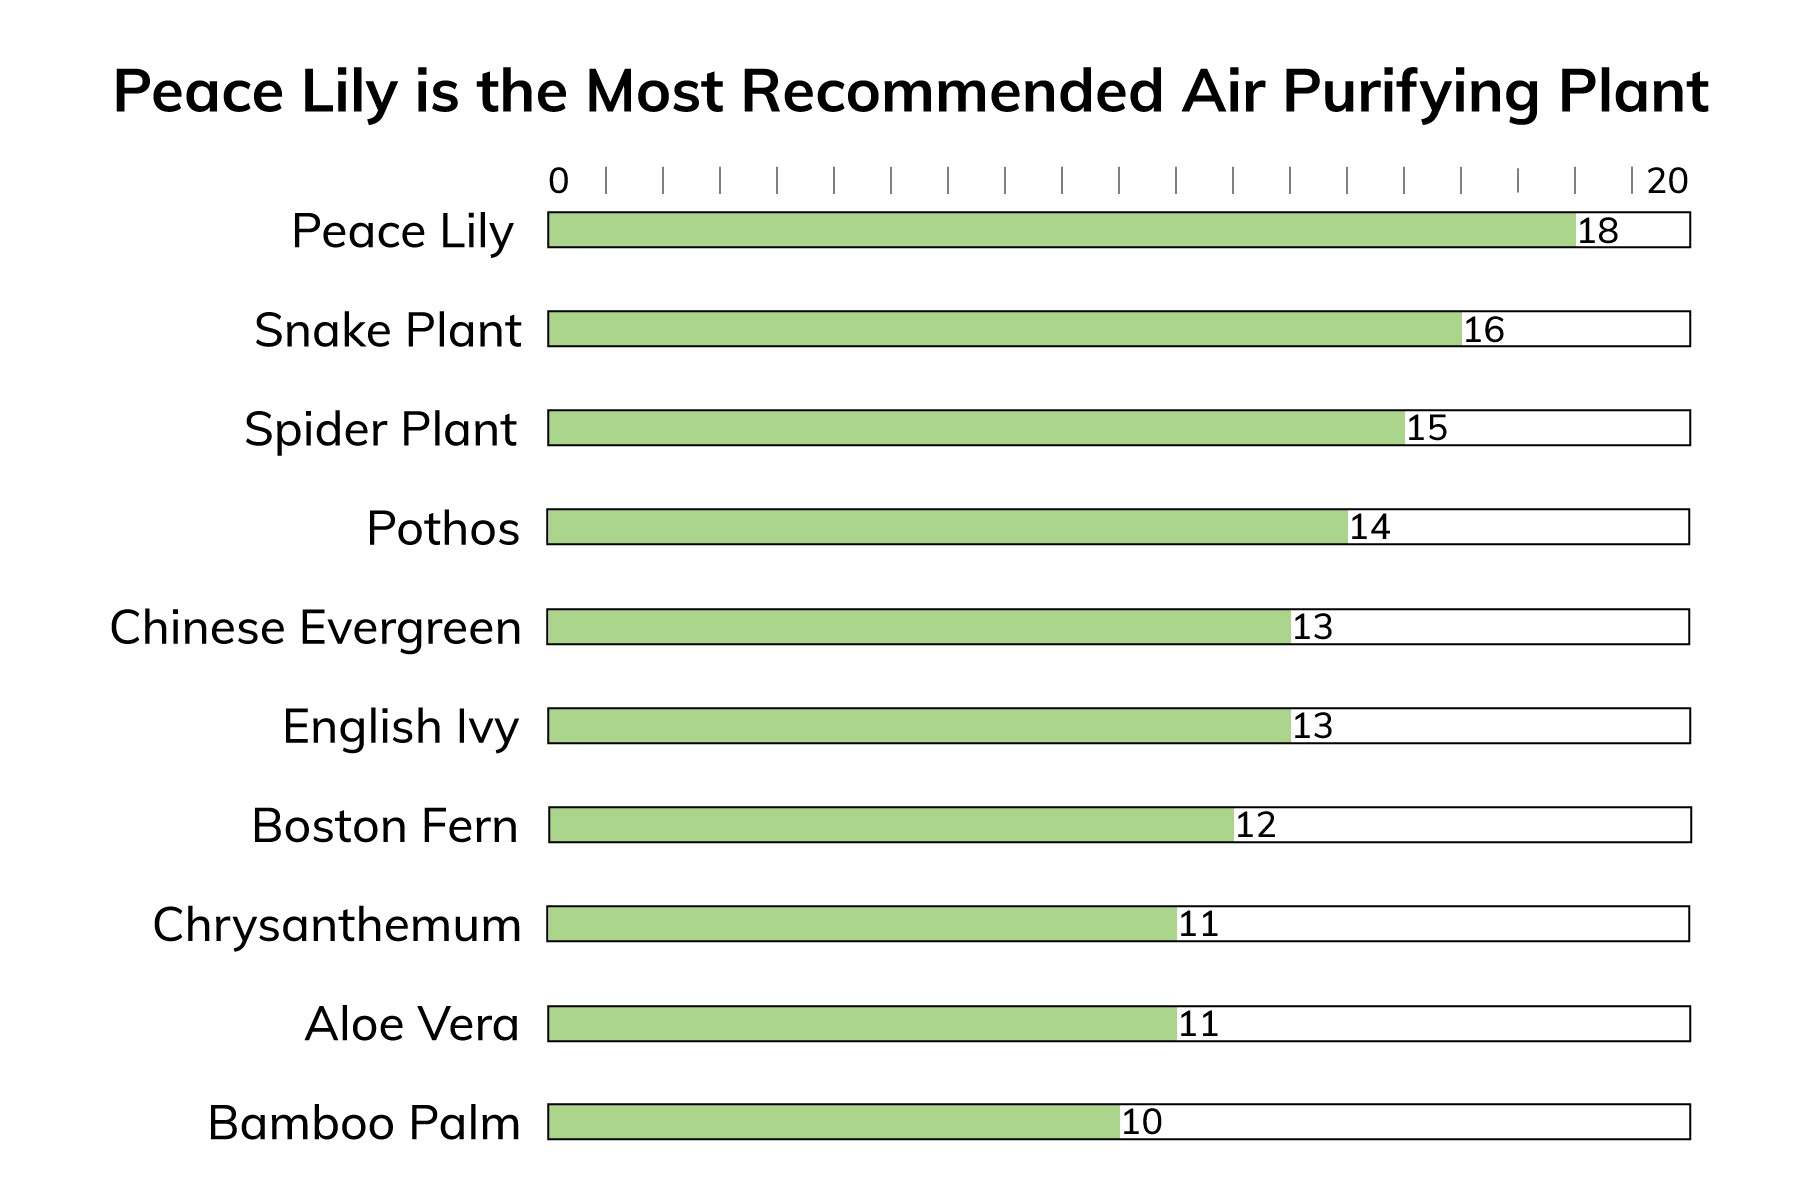 The Peace Lily is the most recommended plant for air purification